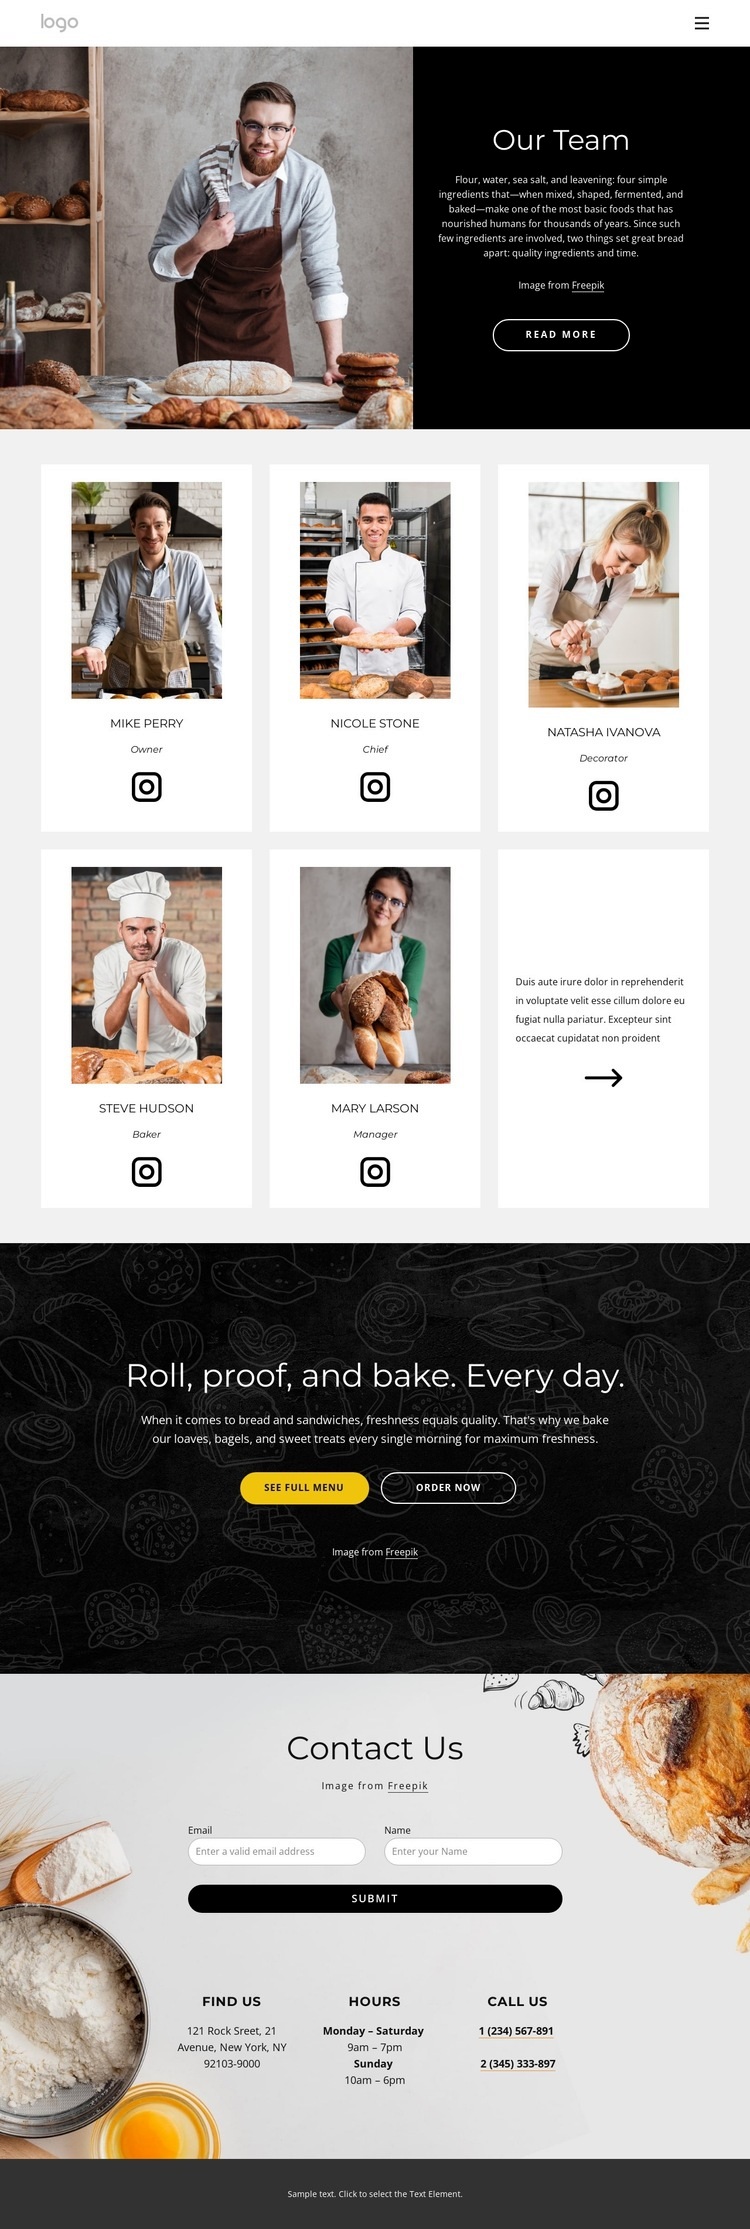 Bread bakers Web Page Design